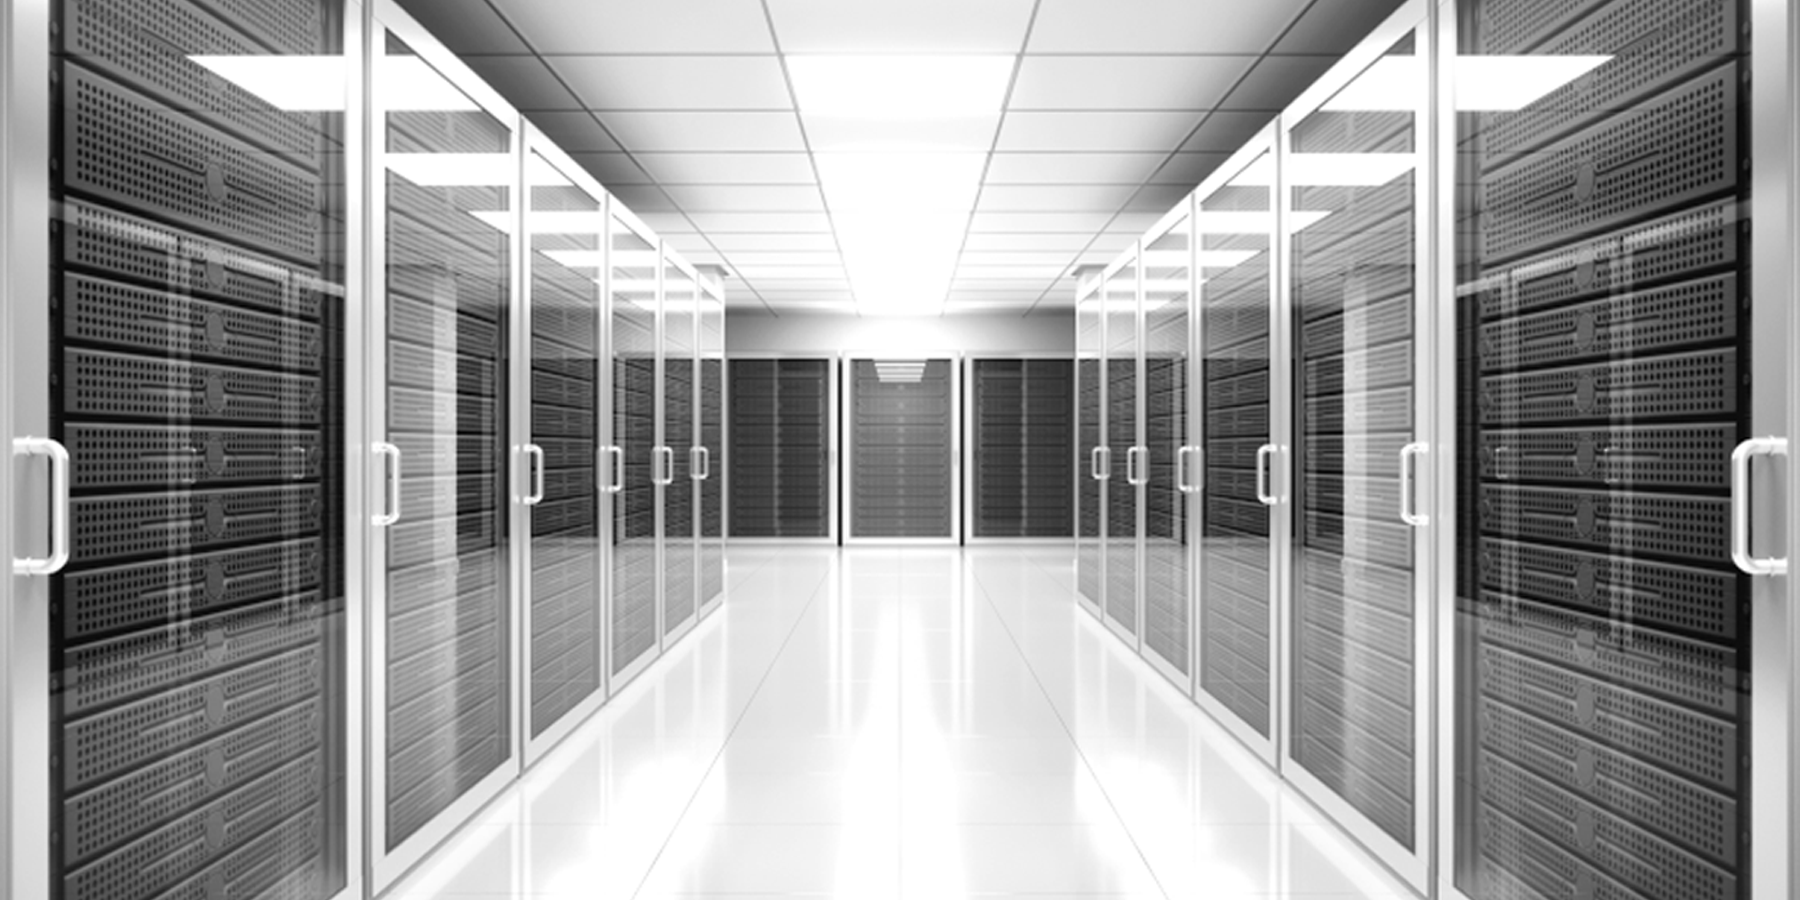 Lifecycle Management in the Data Center